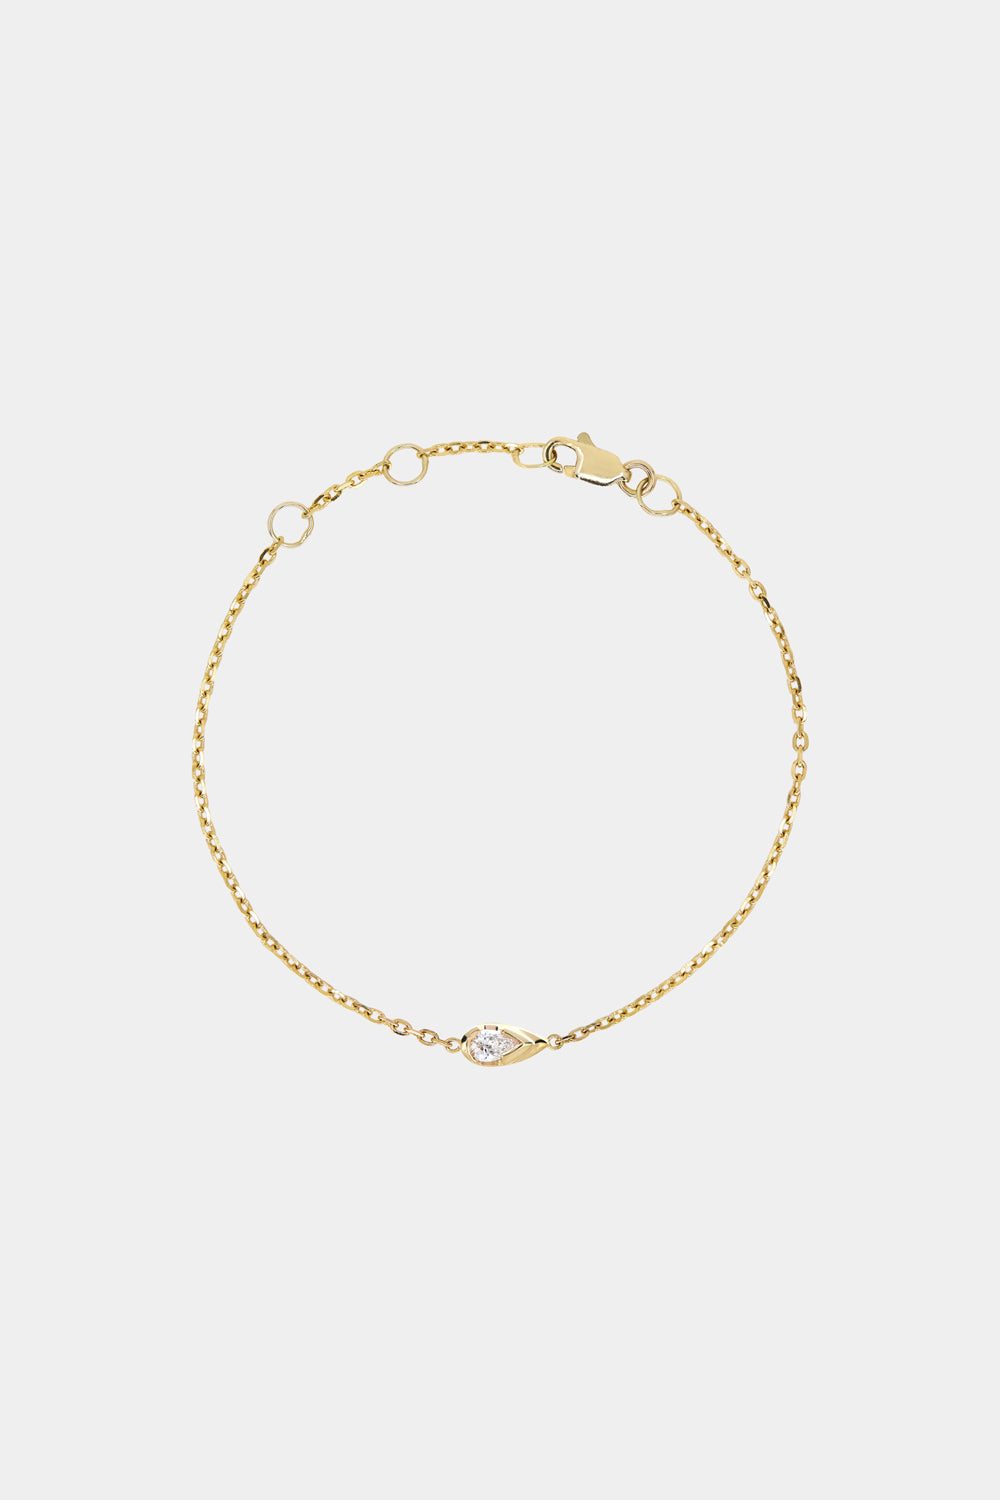 Pear Diamond Bracelet | 9K Yellow or Rose Gold, More Options Available